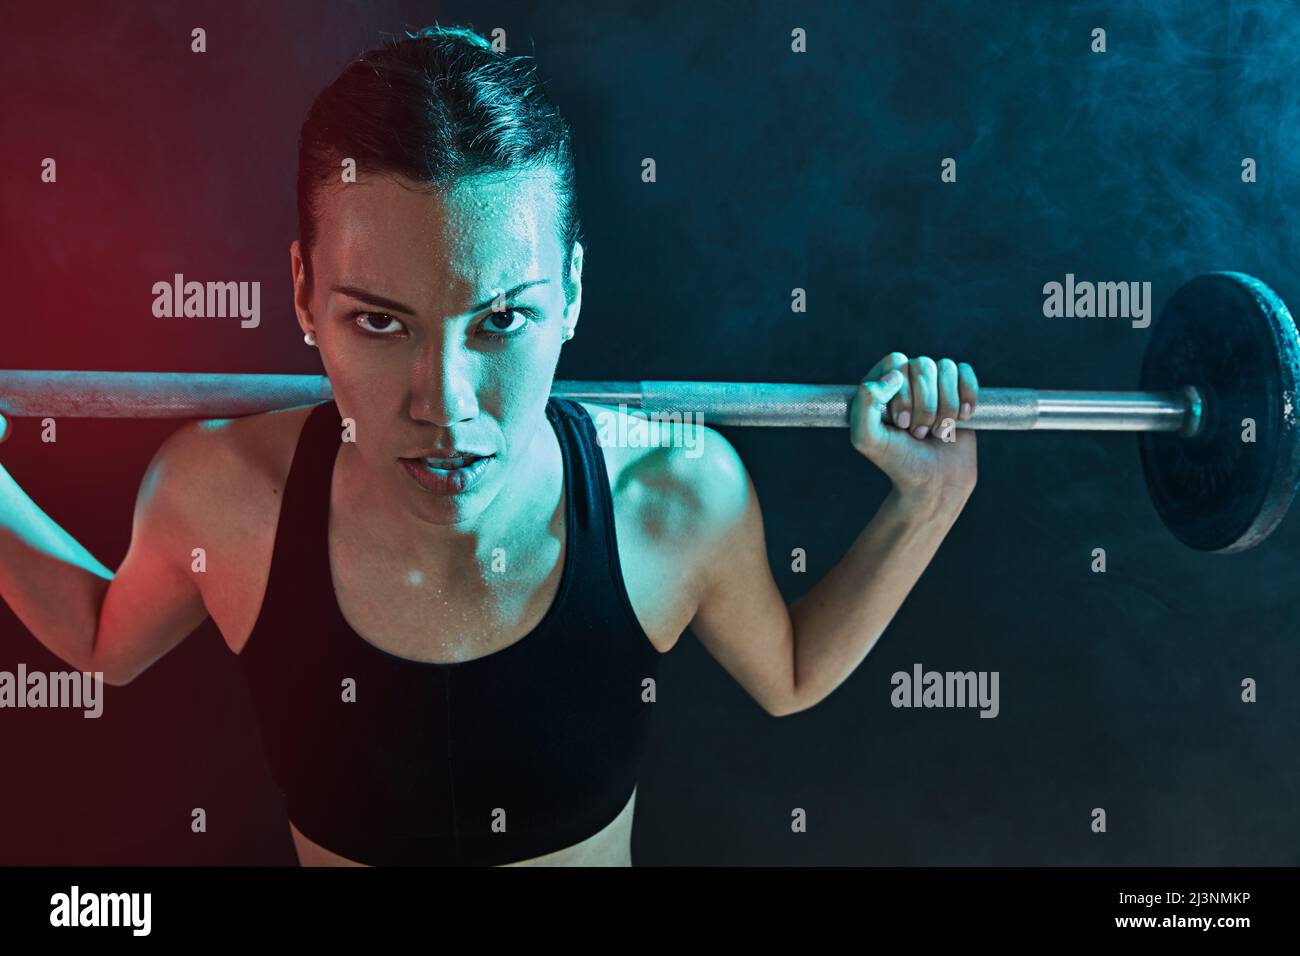 I believe in redefining my impossible. Shot of a young woman lifting weights against a dark background. Stock Photo